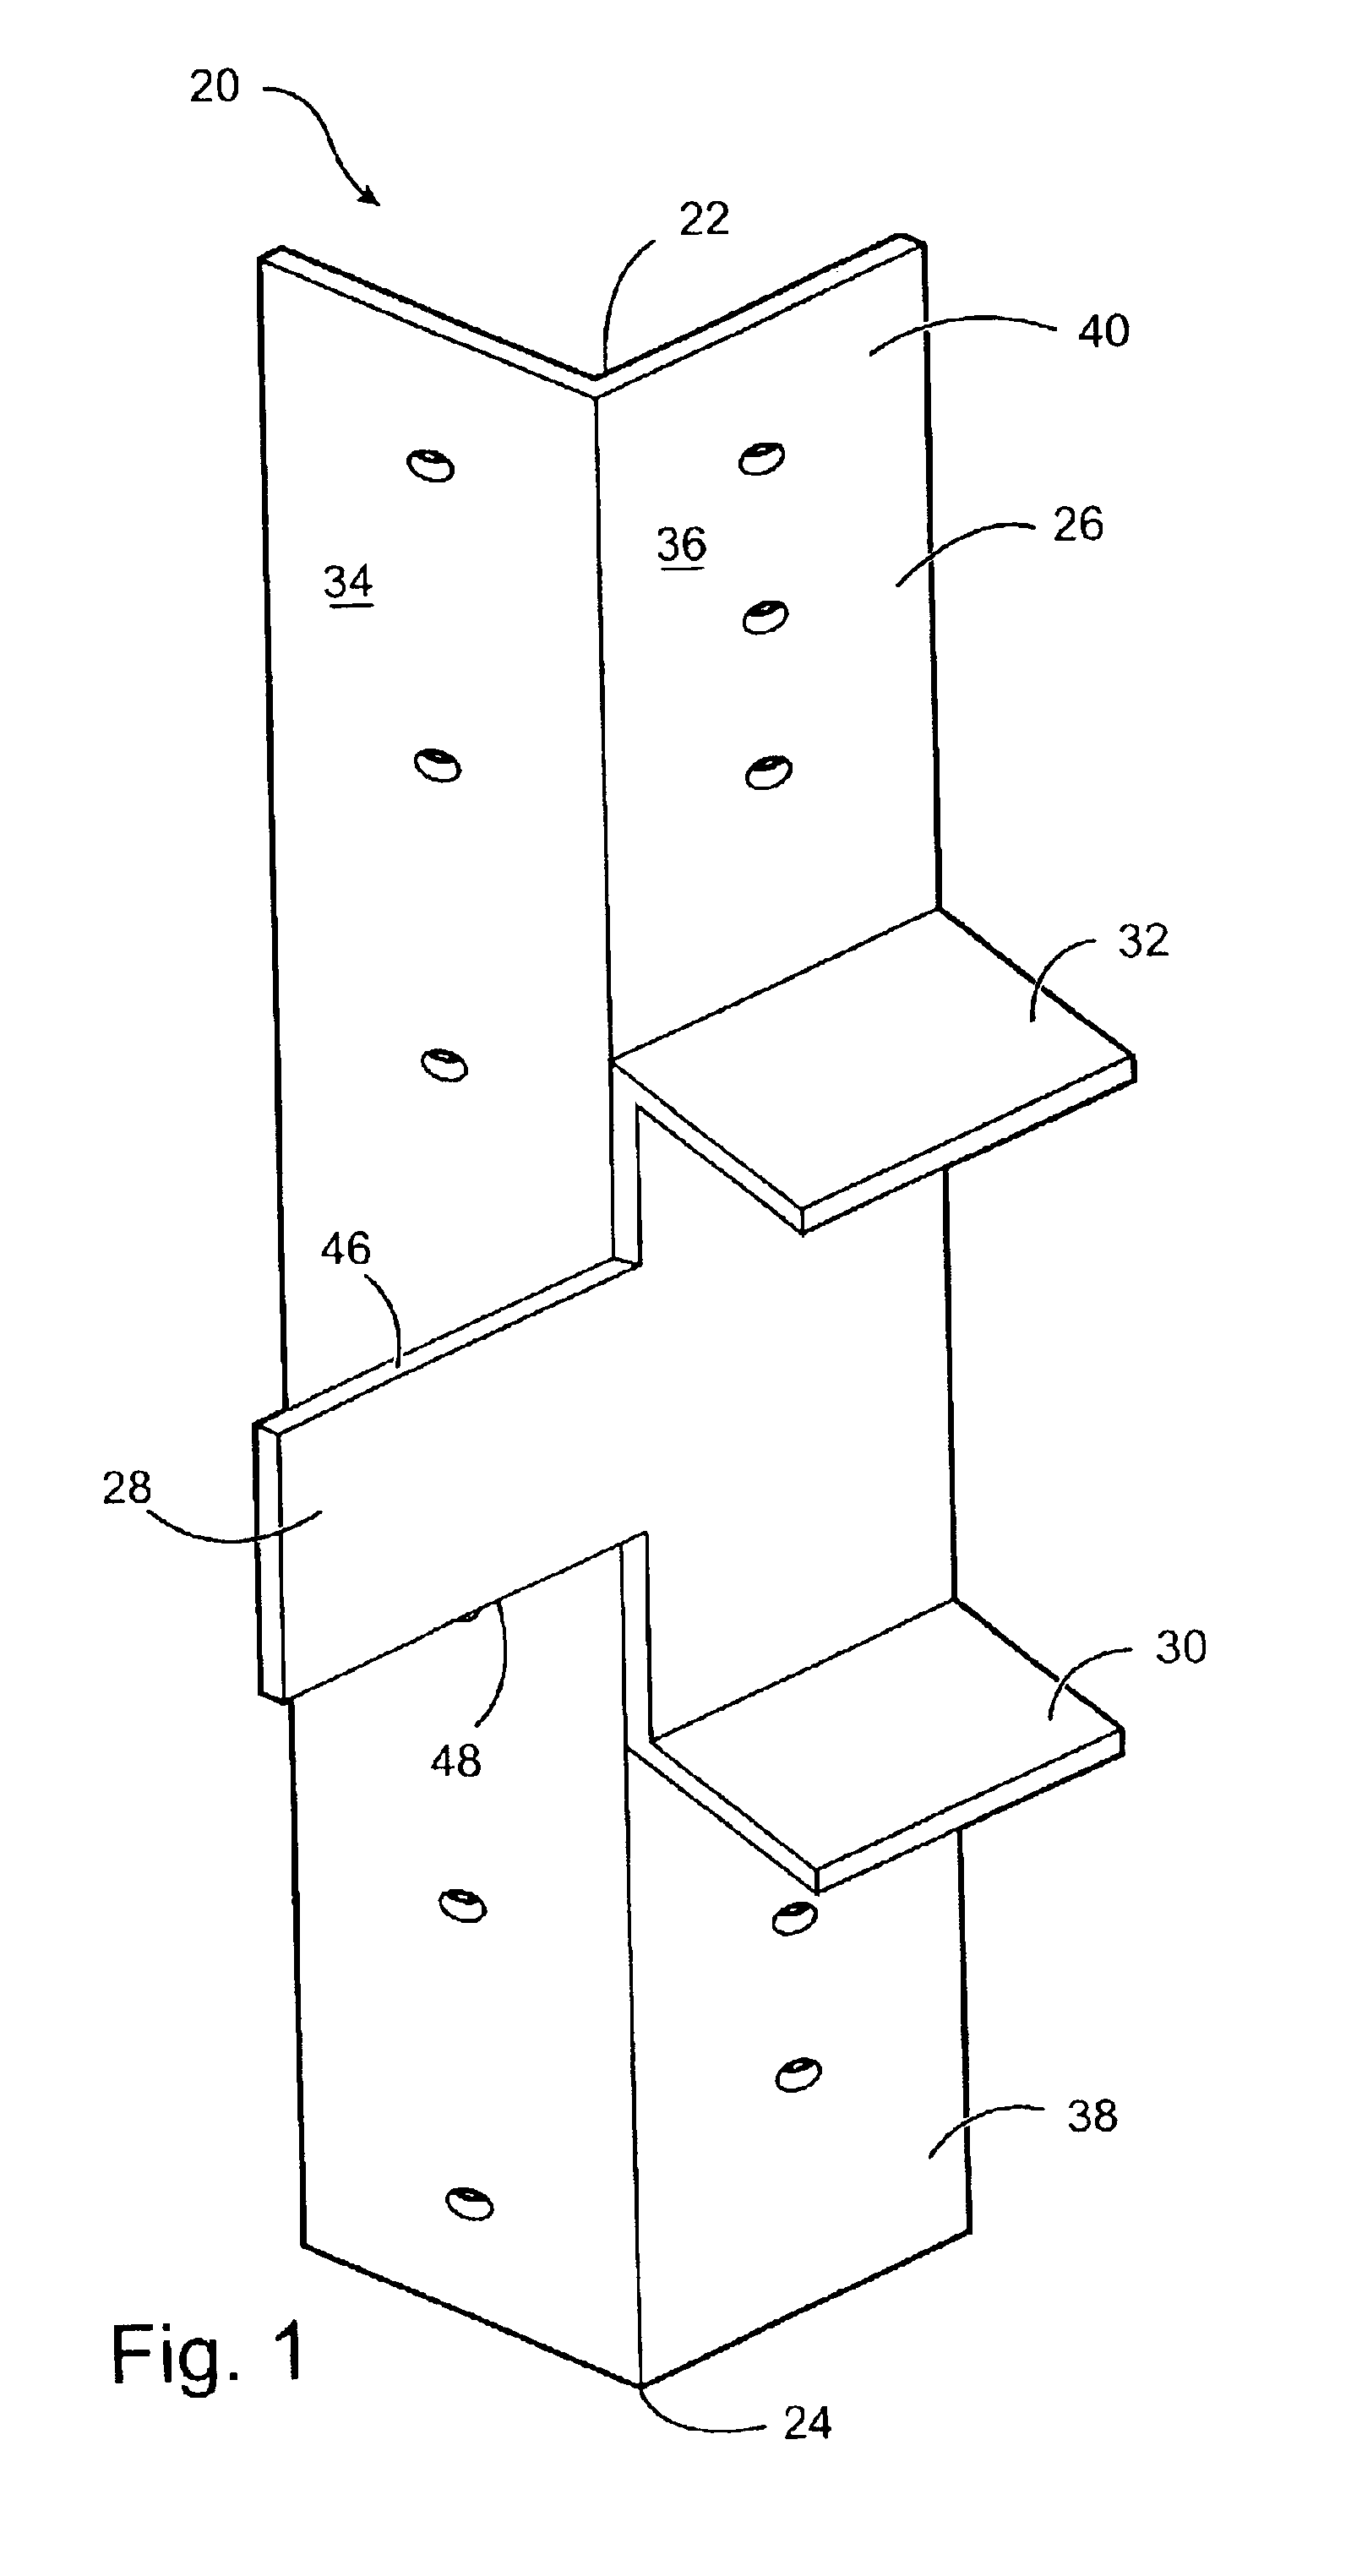 Method and apparatus for assembly of stair forms